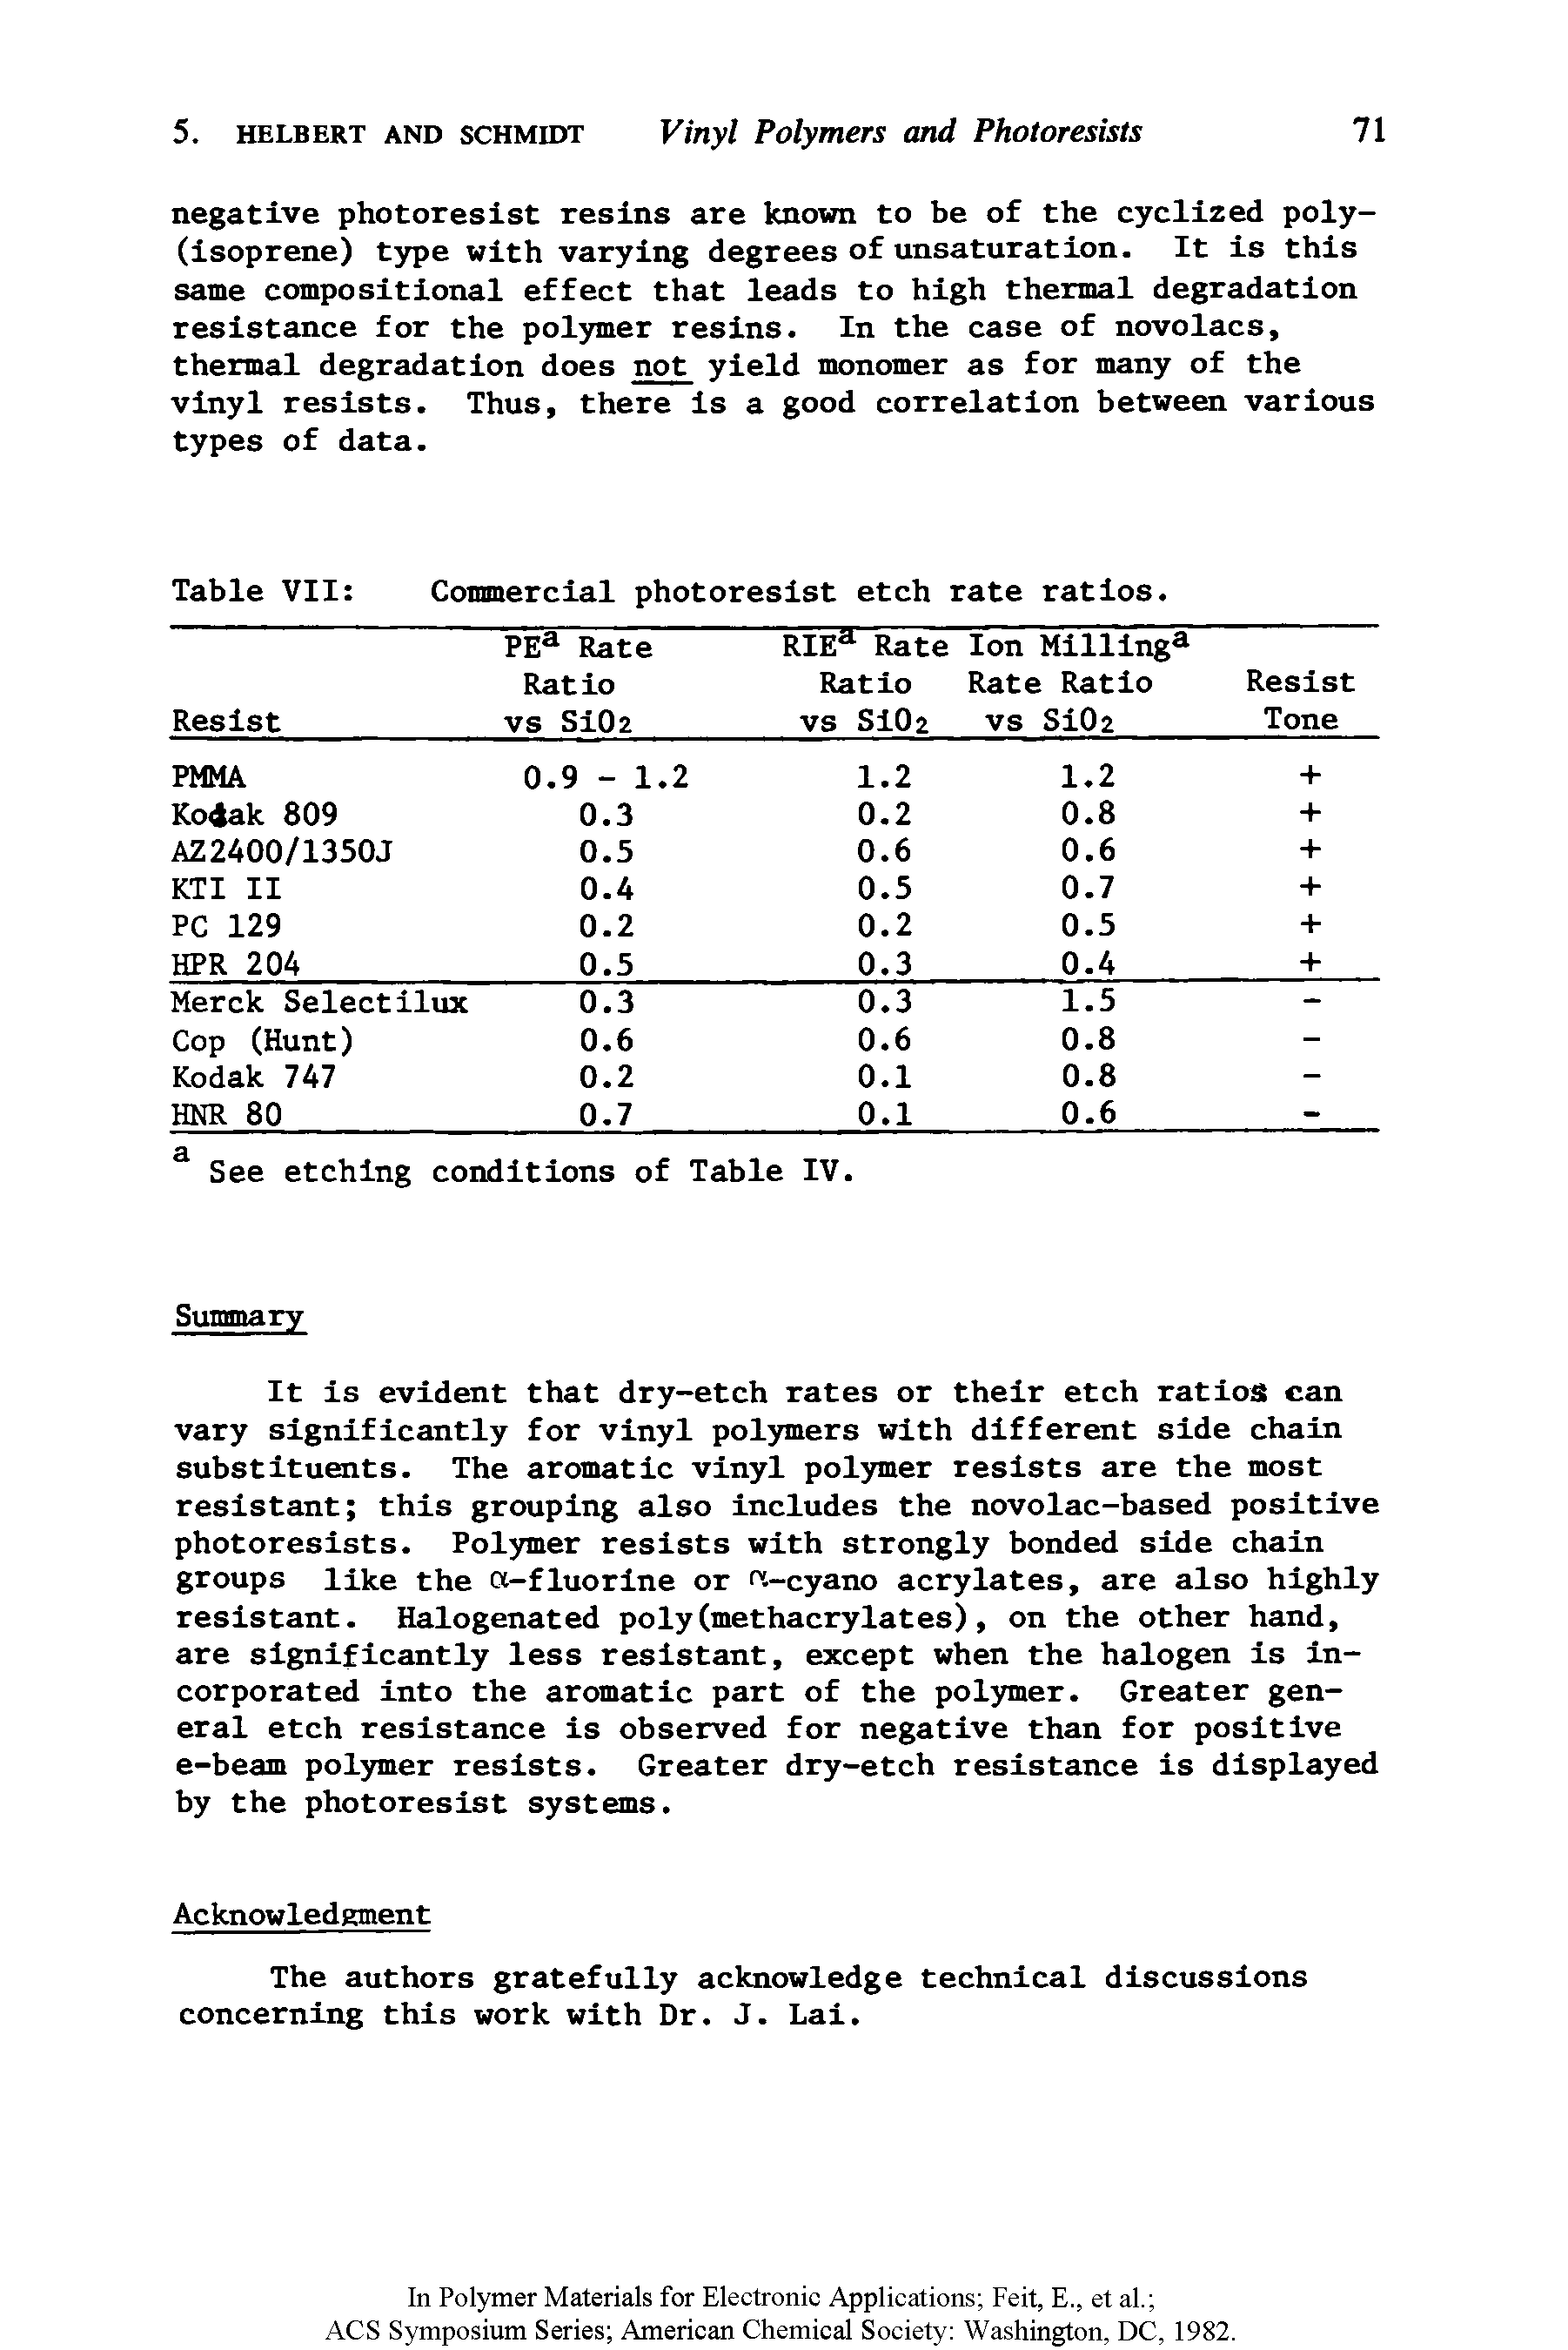 Table VII Commercial photoresist etch rate ratios.